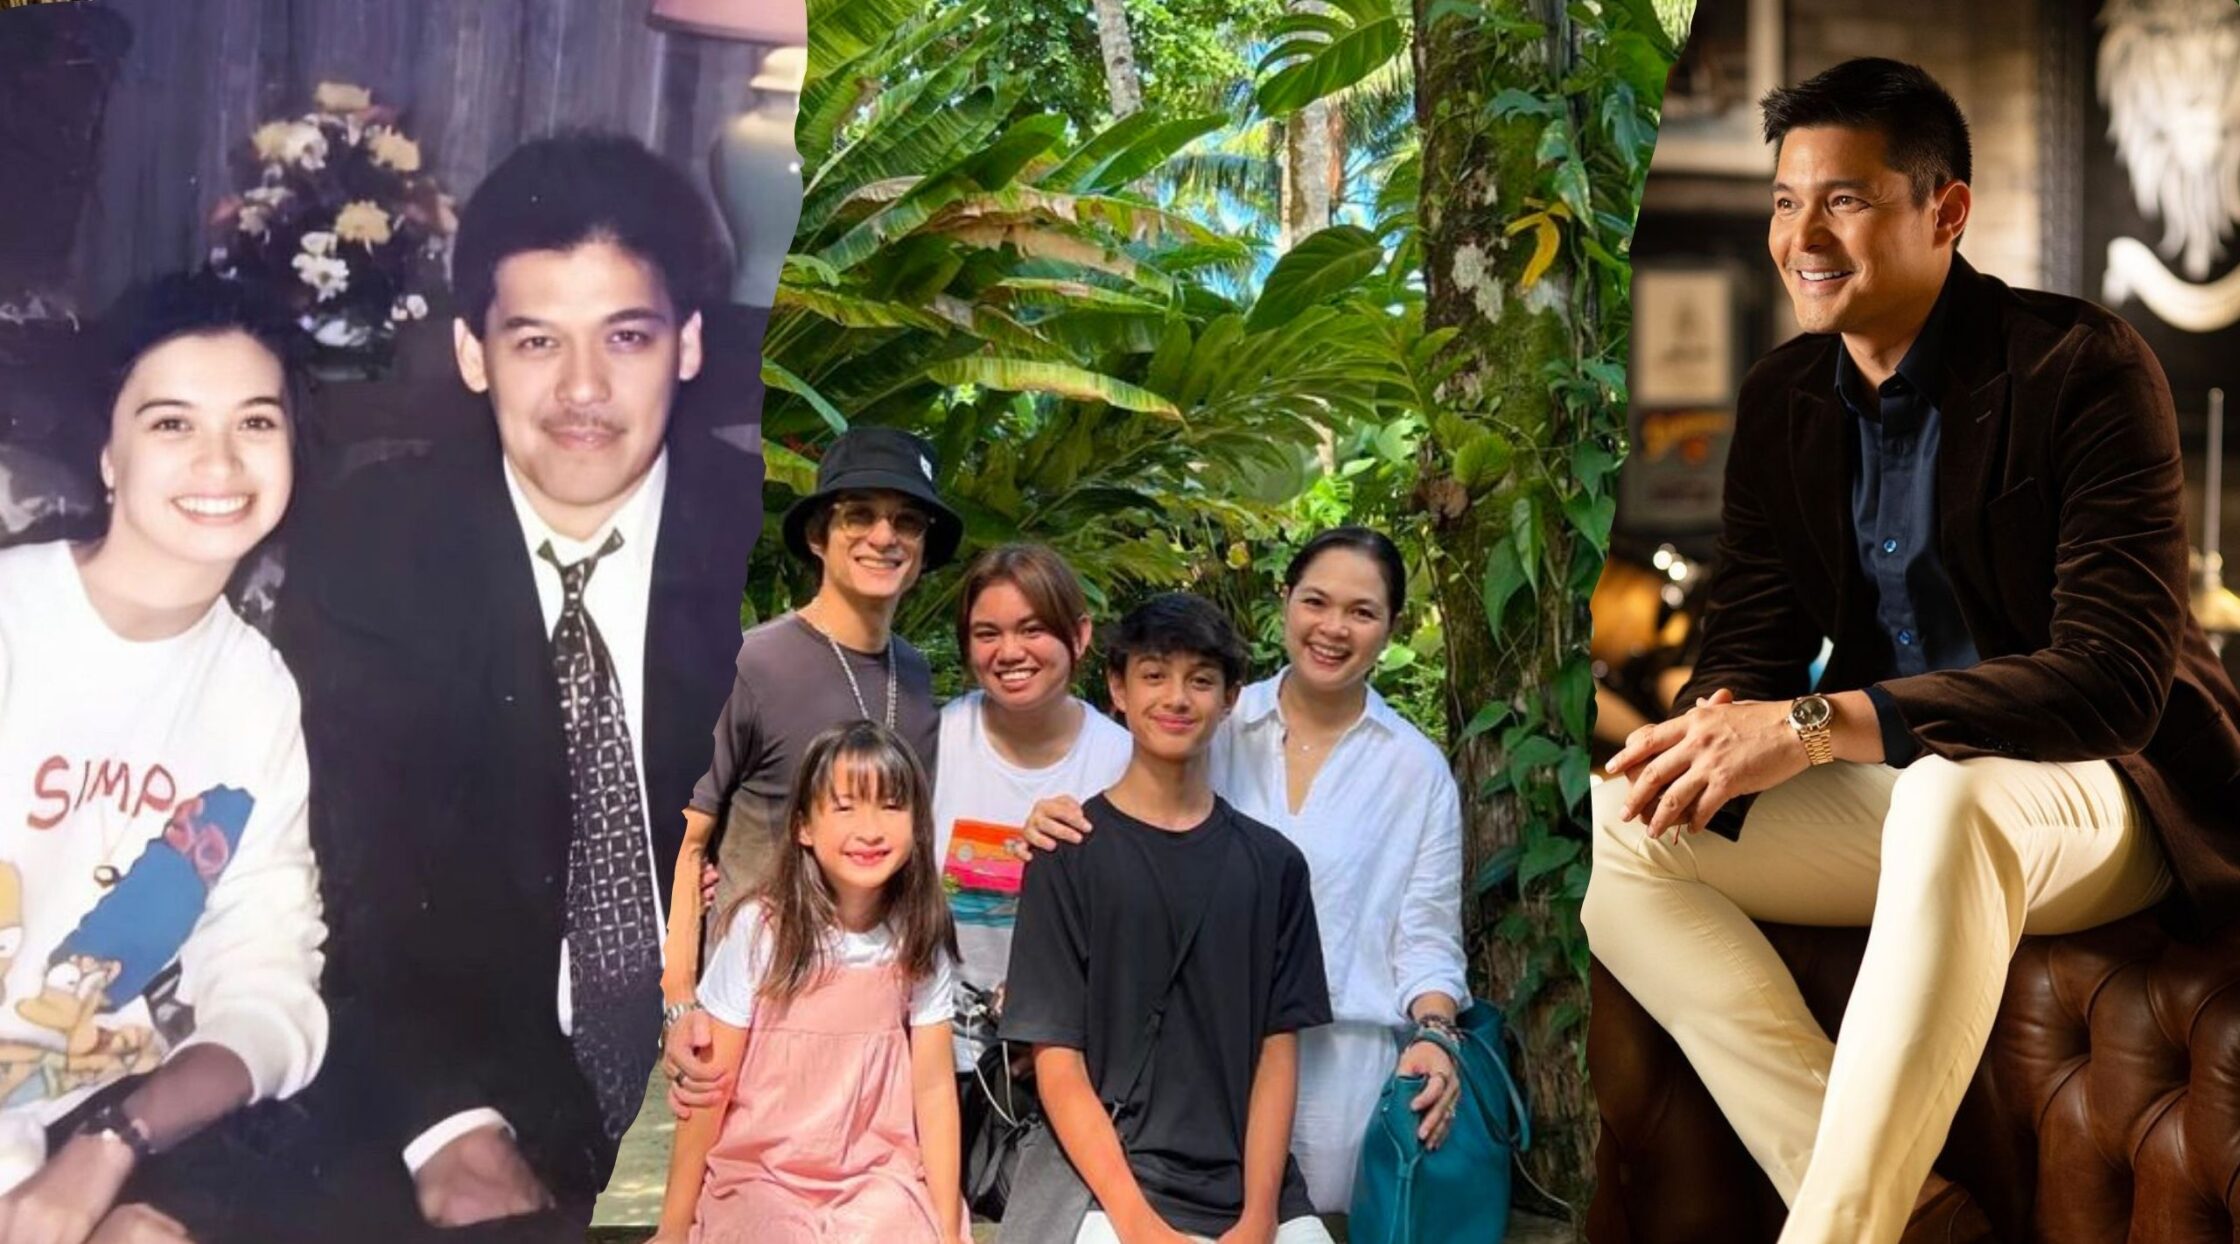 Celebrity parents wishing their dads and their husbands a Happy Father's Day